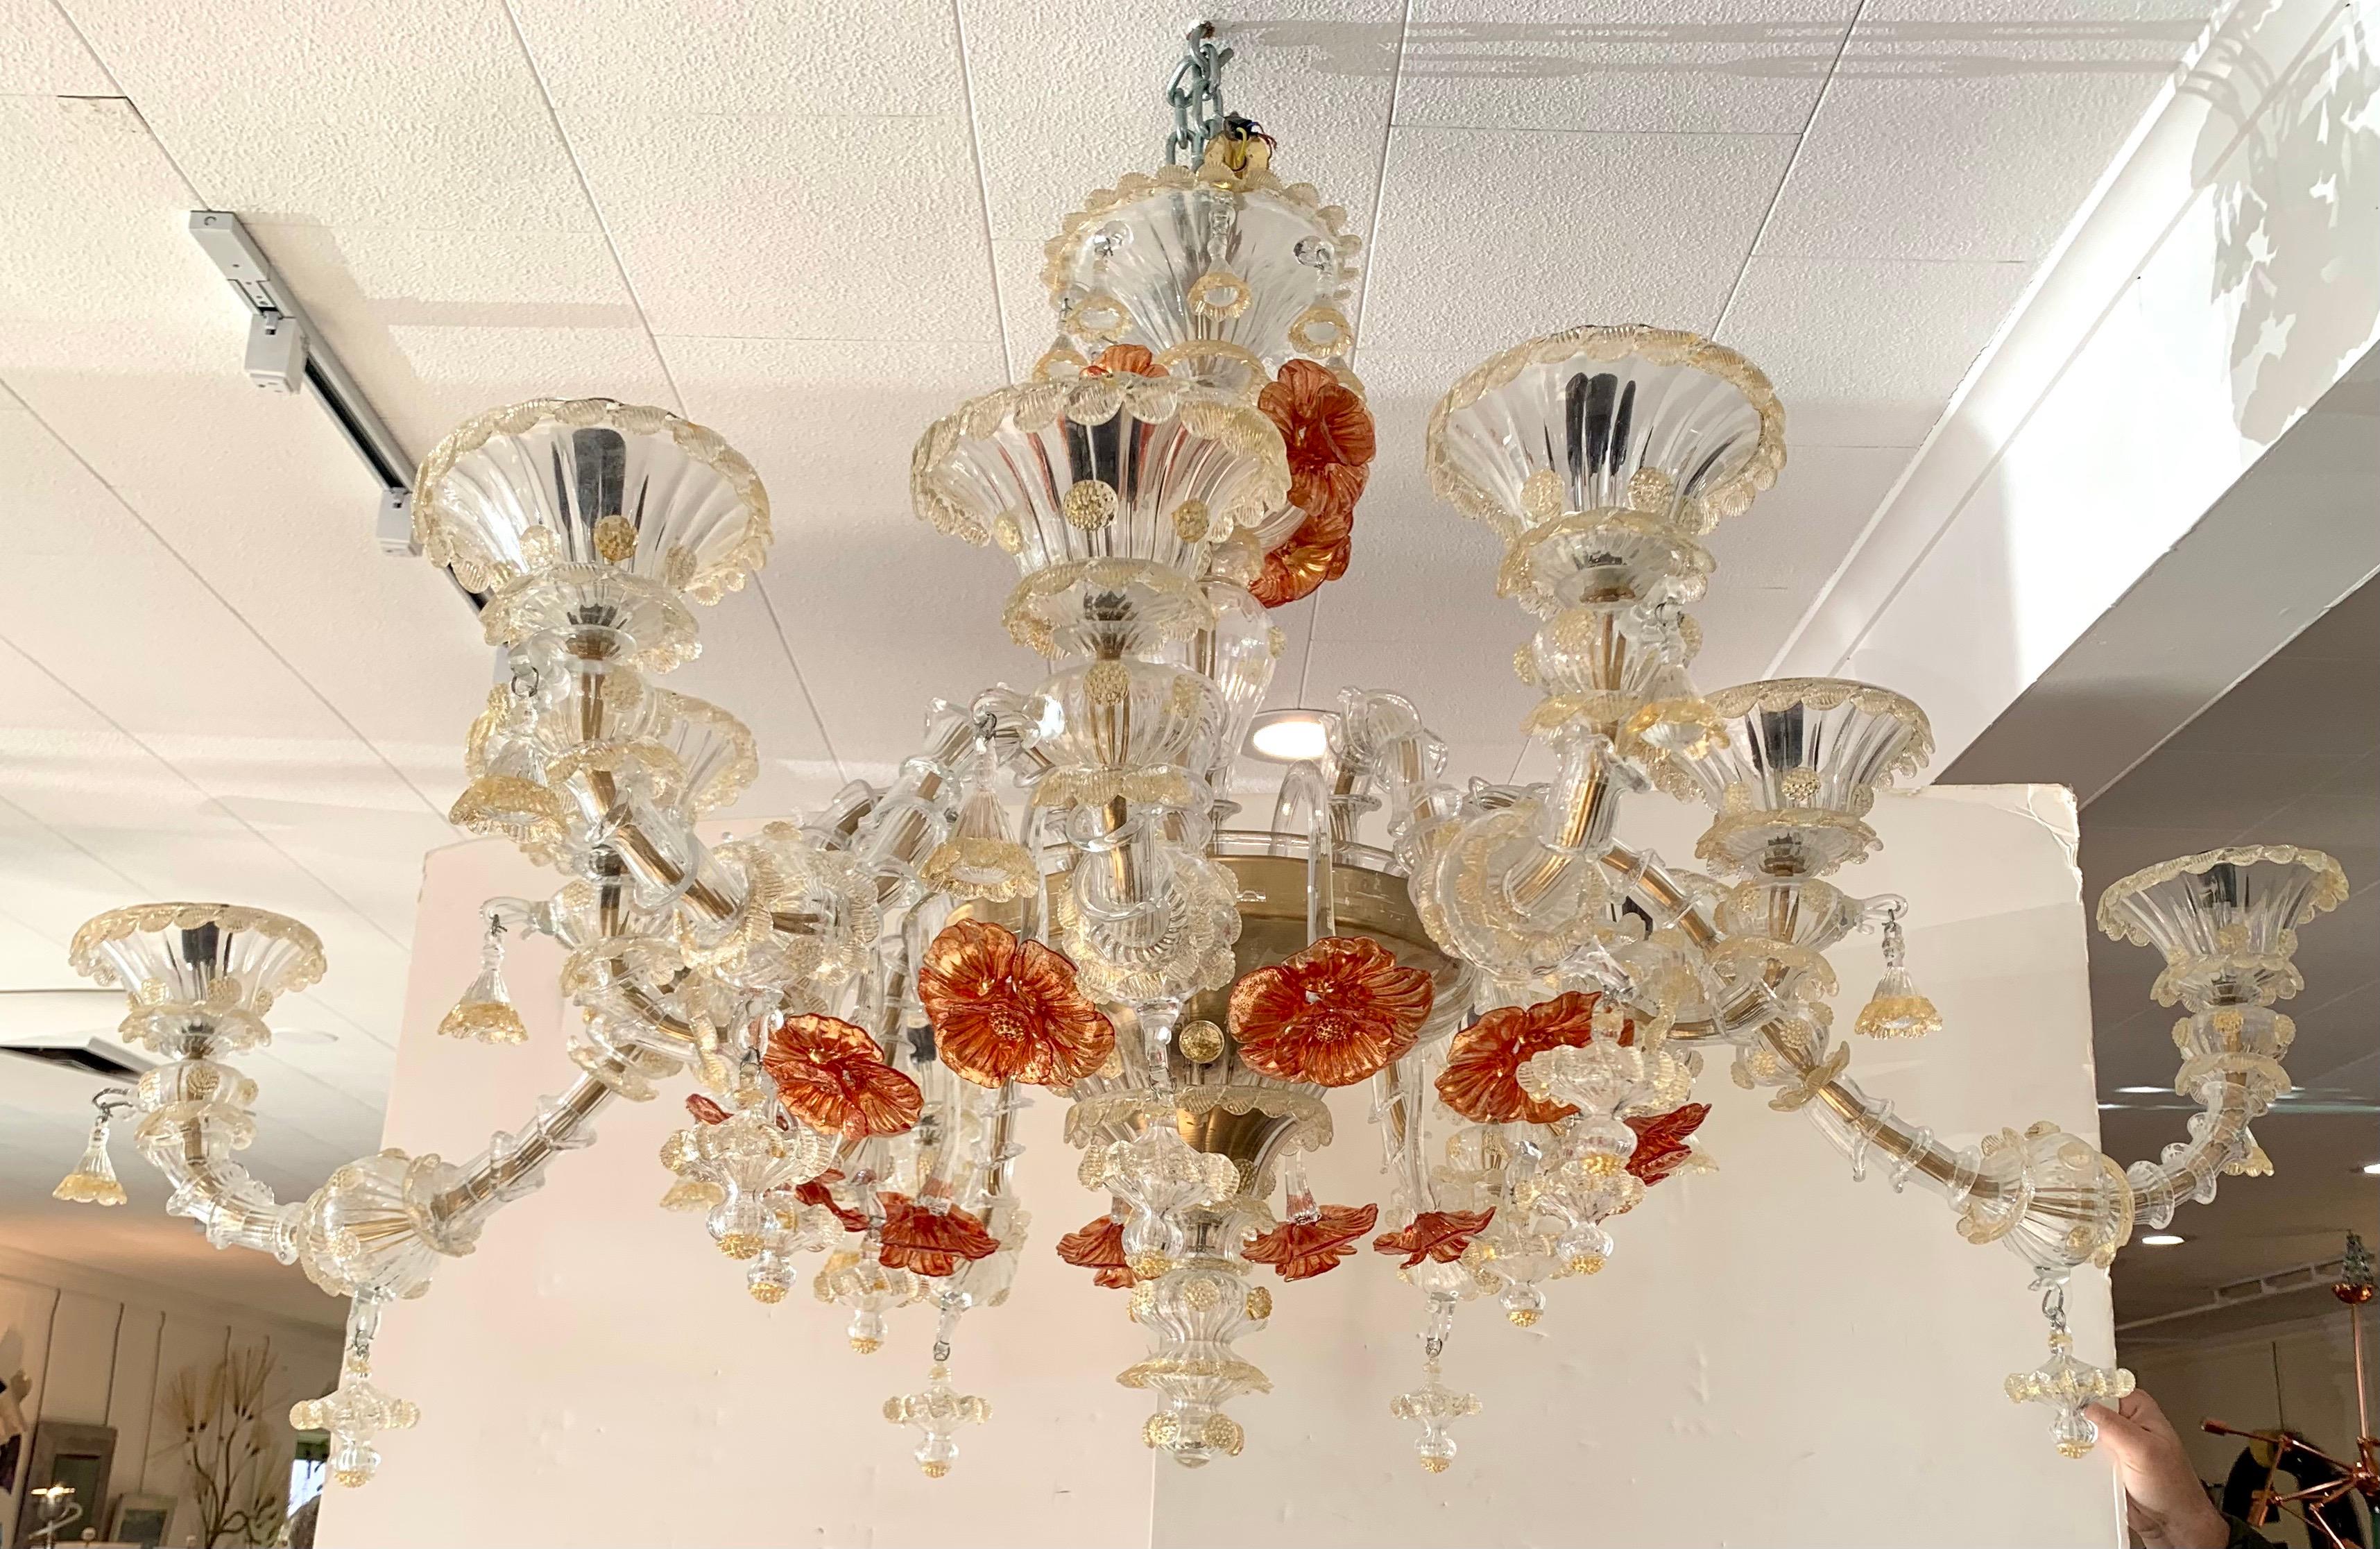 Stunning Murano chandelier with twelve lights and exquisite detail. Made in Italy.